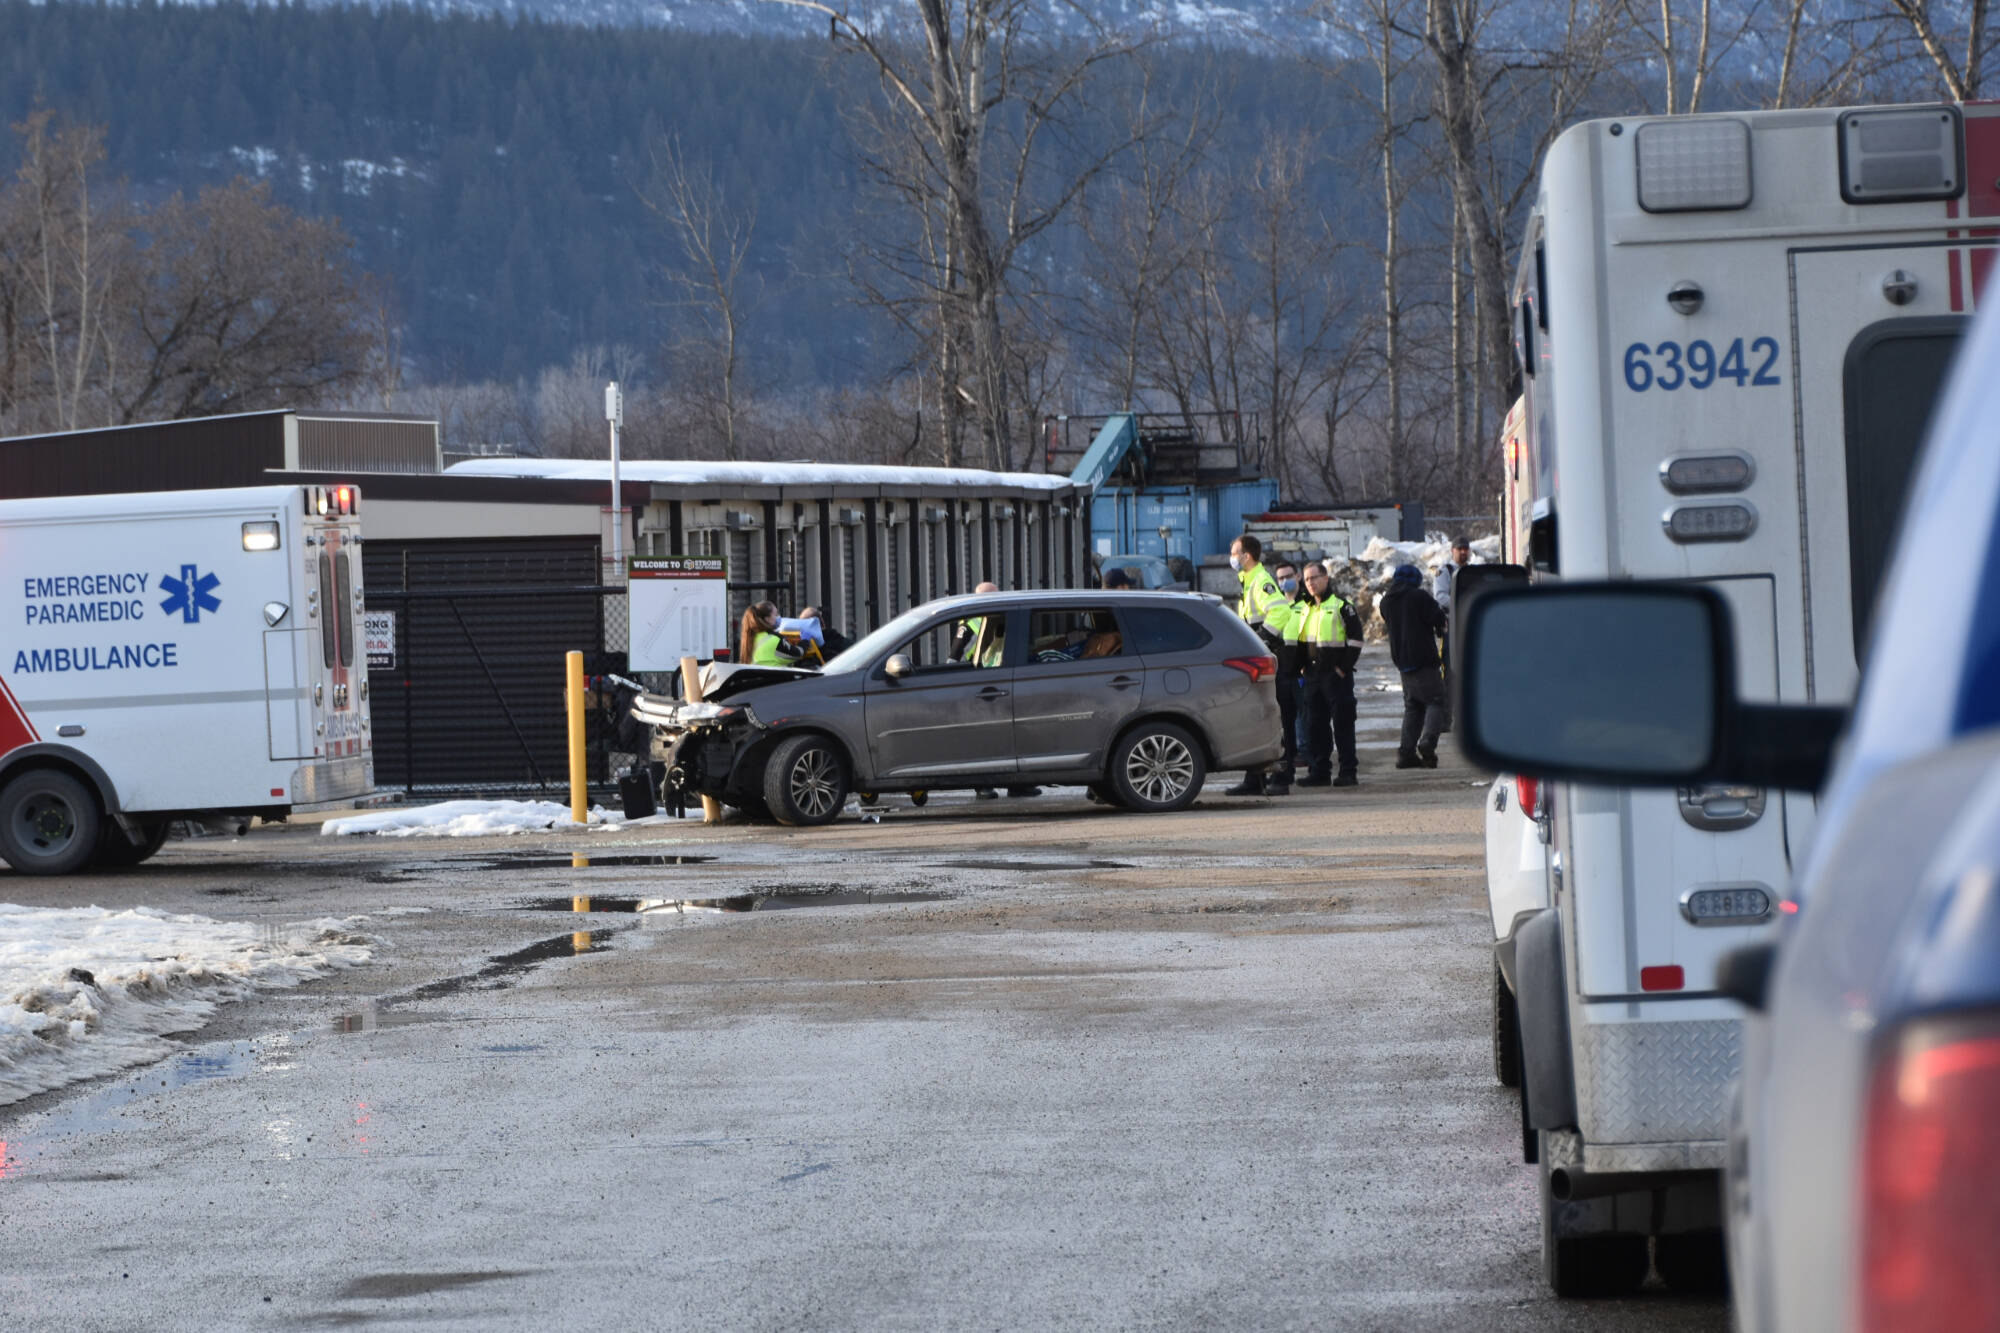 Several police vehicles and ambulances were converged on the roadway next to the Starbucks drive-thru in Salmon Arm about 4:45 p.m. on Monday, March 6 where a vehicle had crashed into a concrete post. The yellow post can be seen embedded in the hood of the vehicle. (Martha Wickett-Salmon Arm Observer)